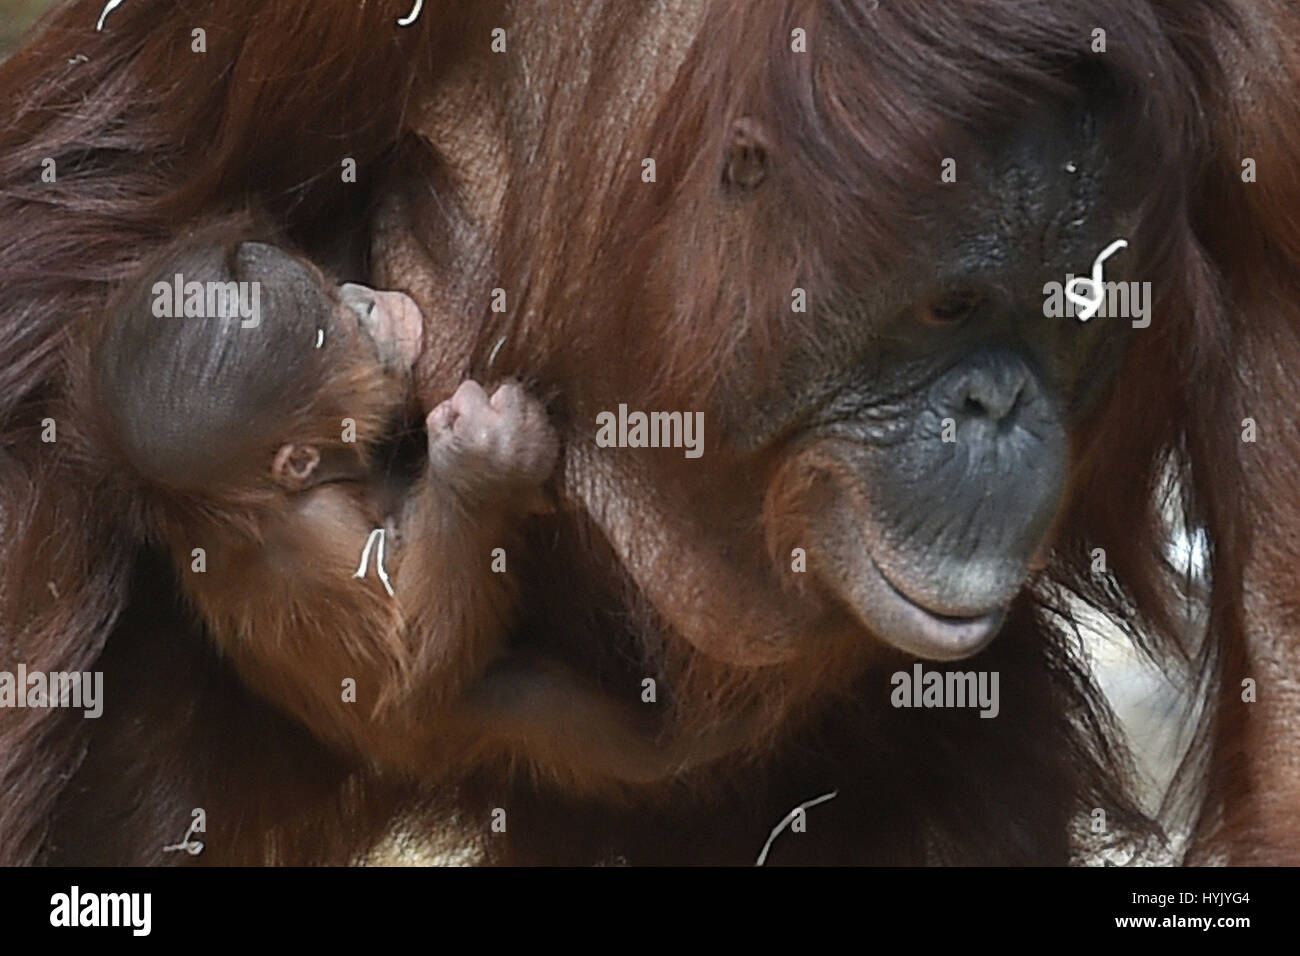 Critically-endangered Bornean orangutan Maliku with her week old baby at Twycross Zoo in Leicestershire. Stock Photo